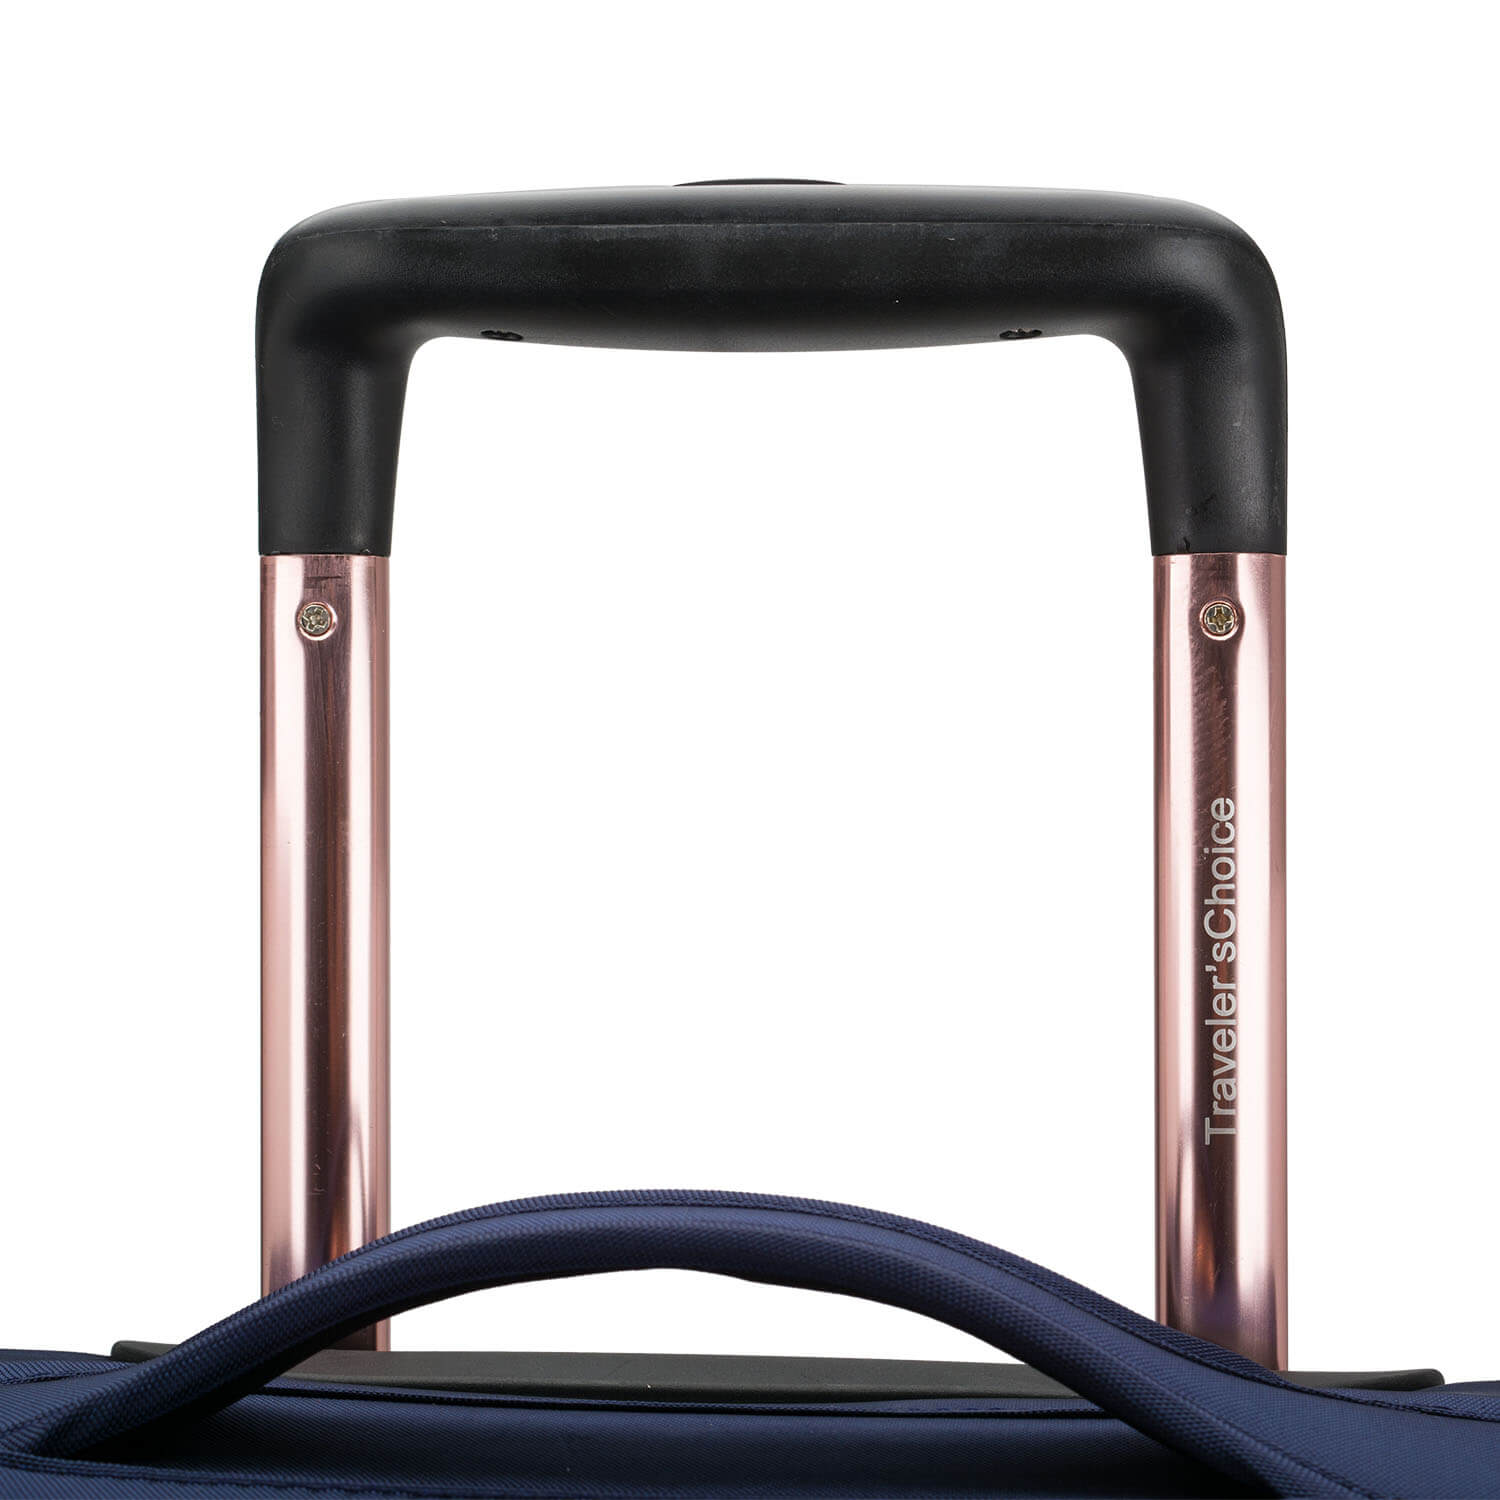 An image of a blue luggage with a pink and black handle system.